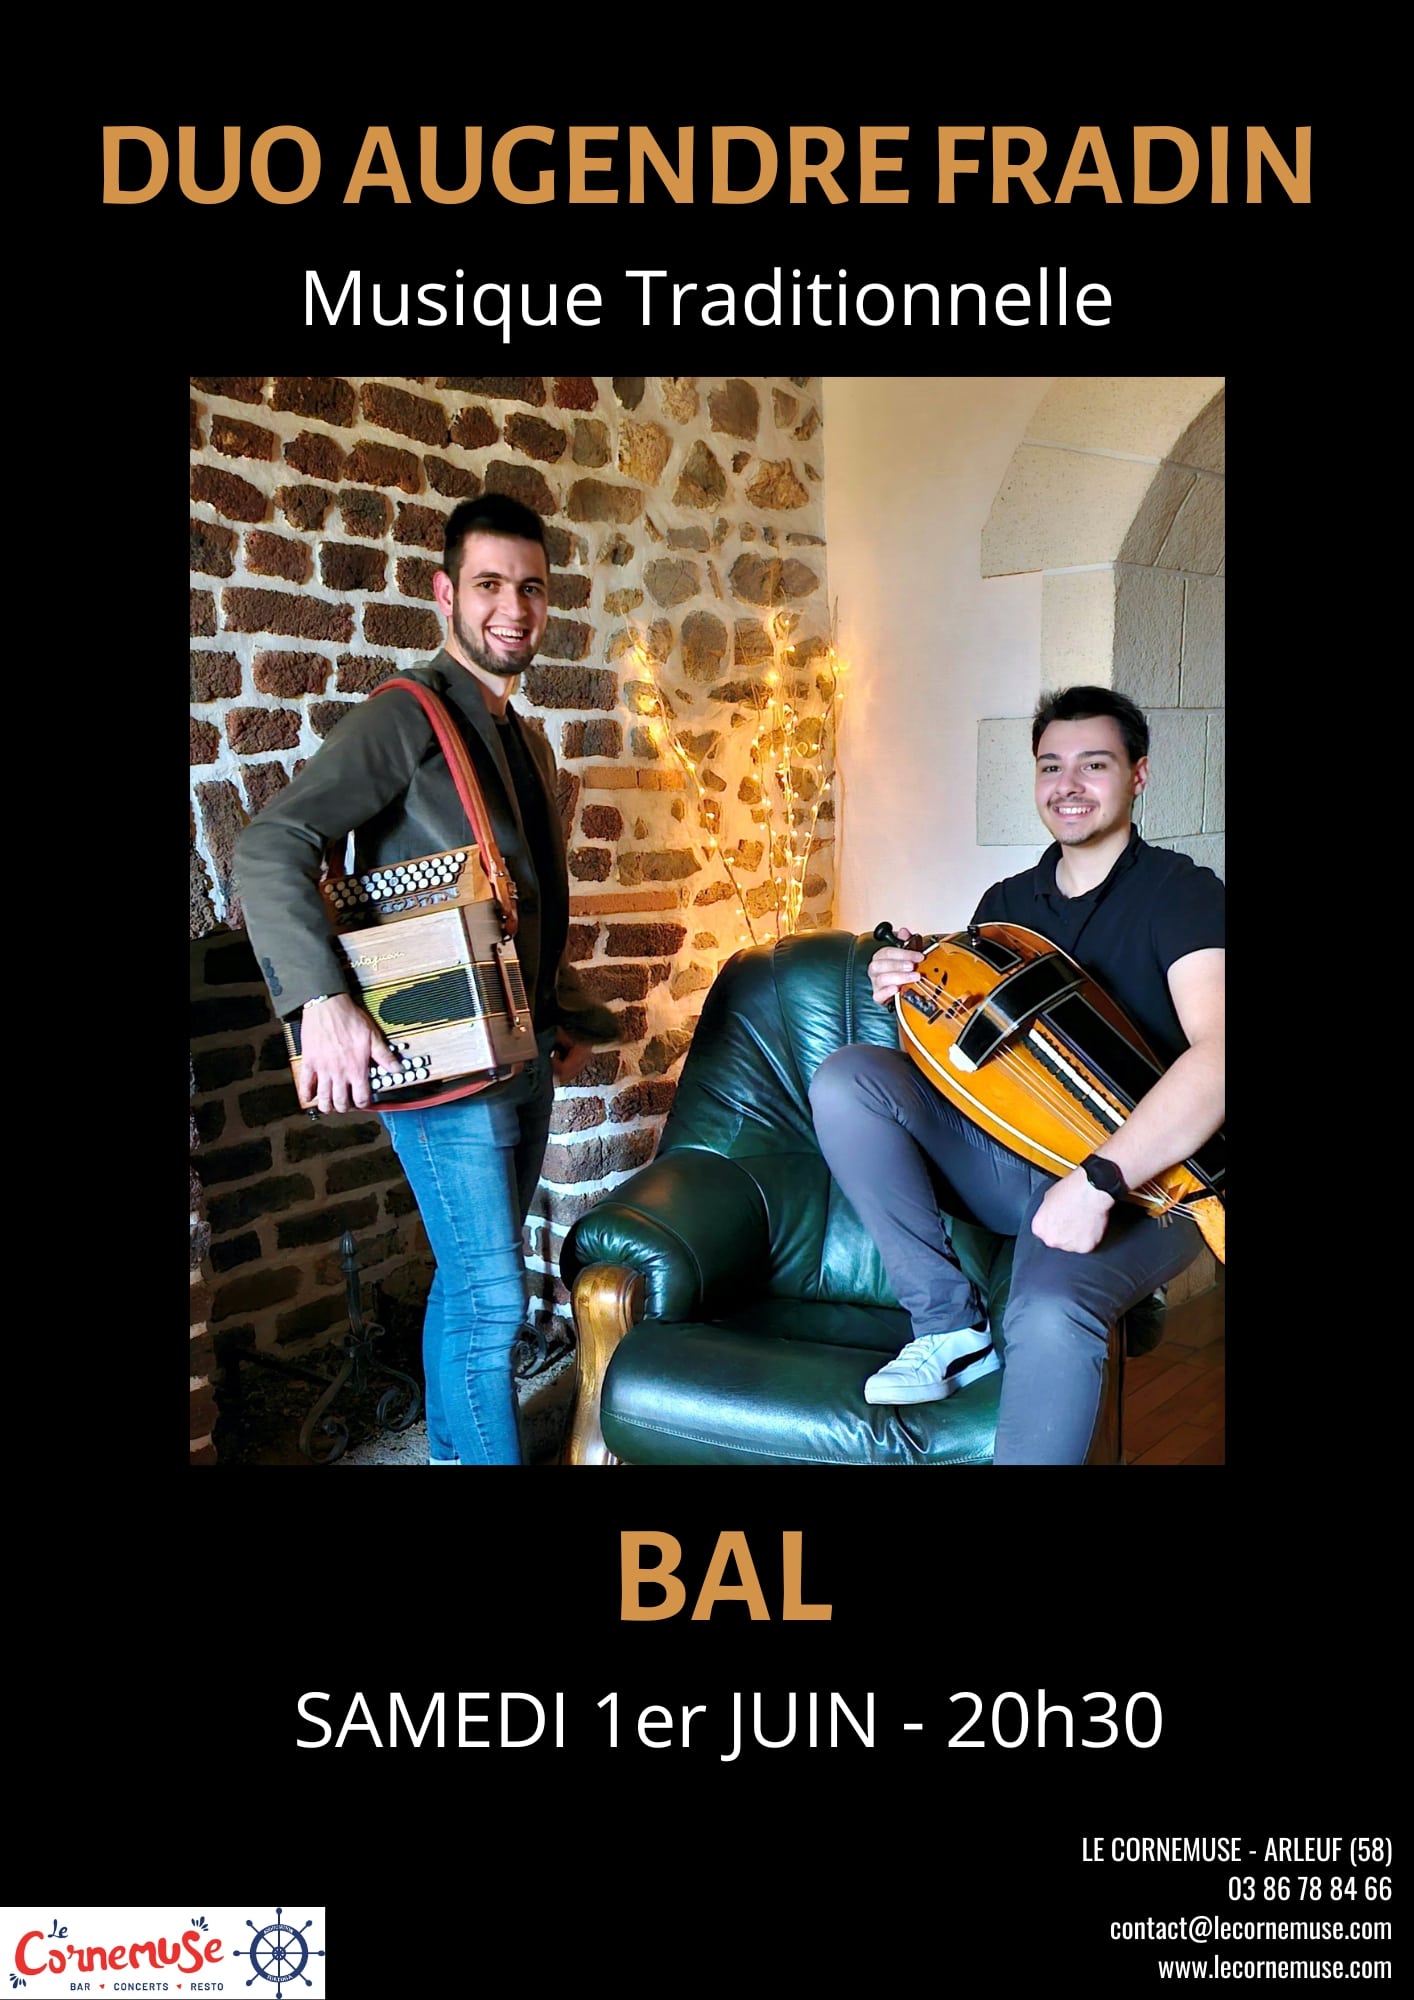 Duo Augendre Fradin musique traditionnelle